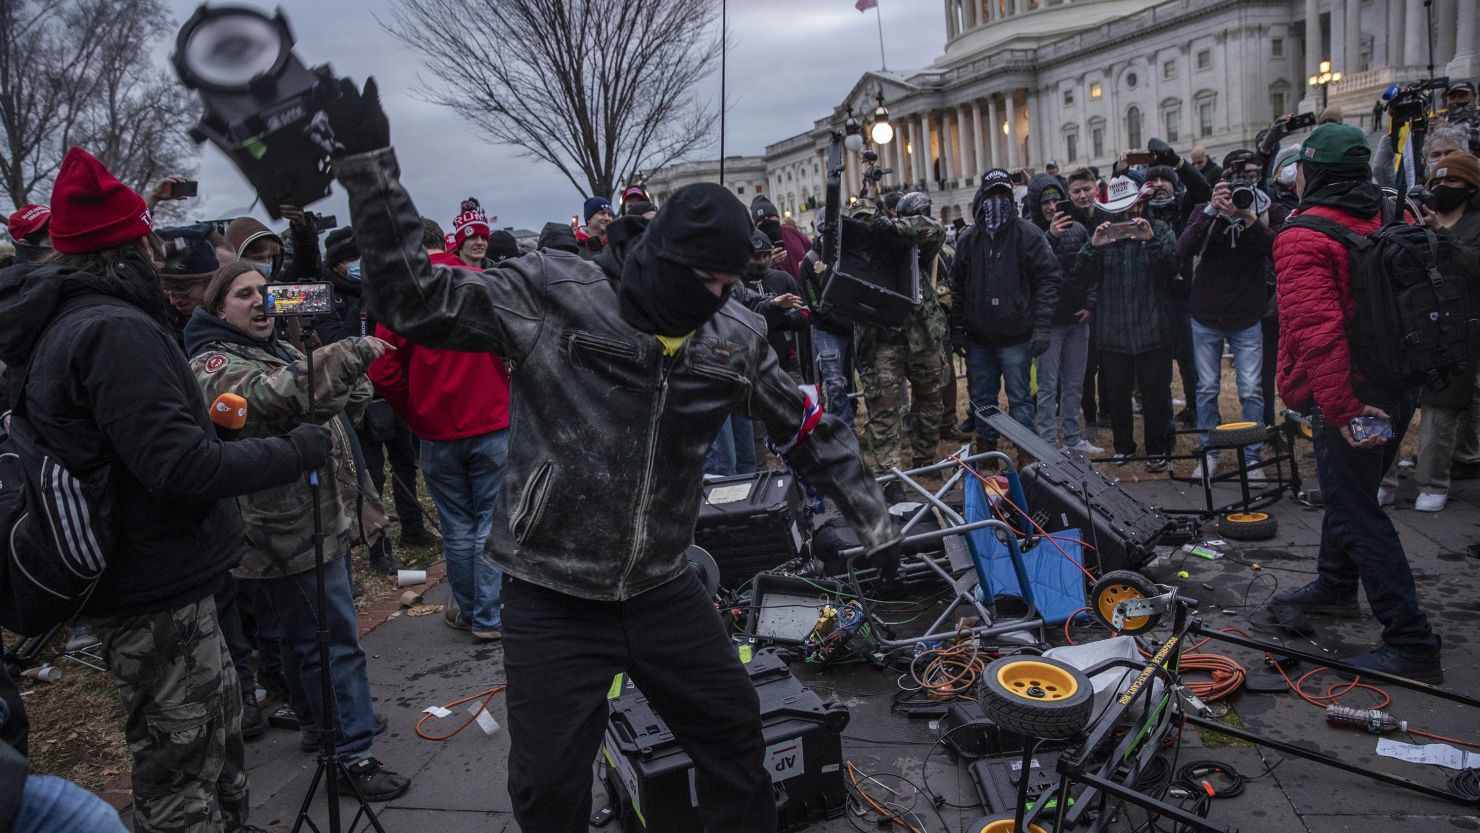 Demonstrators destroy broadcast video equipment outside the US Capitol in n Washington, January 6, 2021. The person at the center of the photo was later identified as Joshua Haynes, according to a criminal complaint.